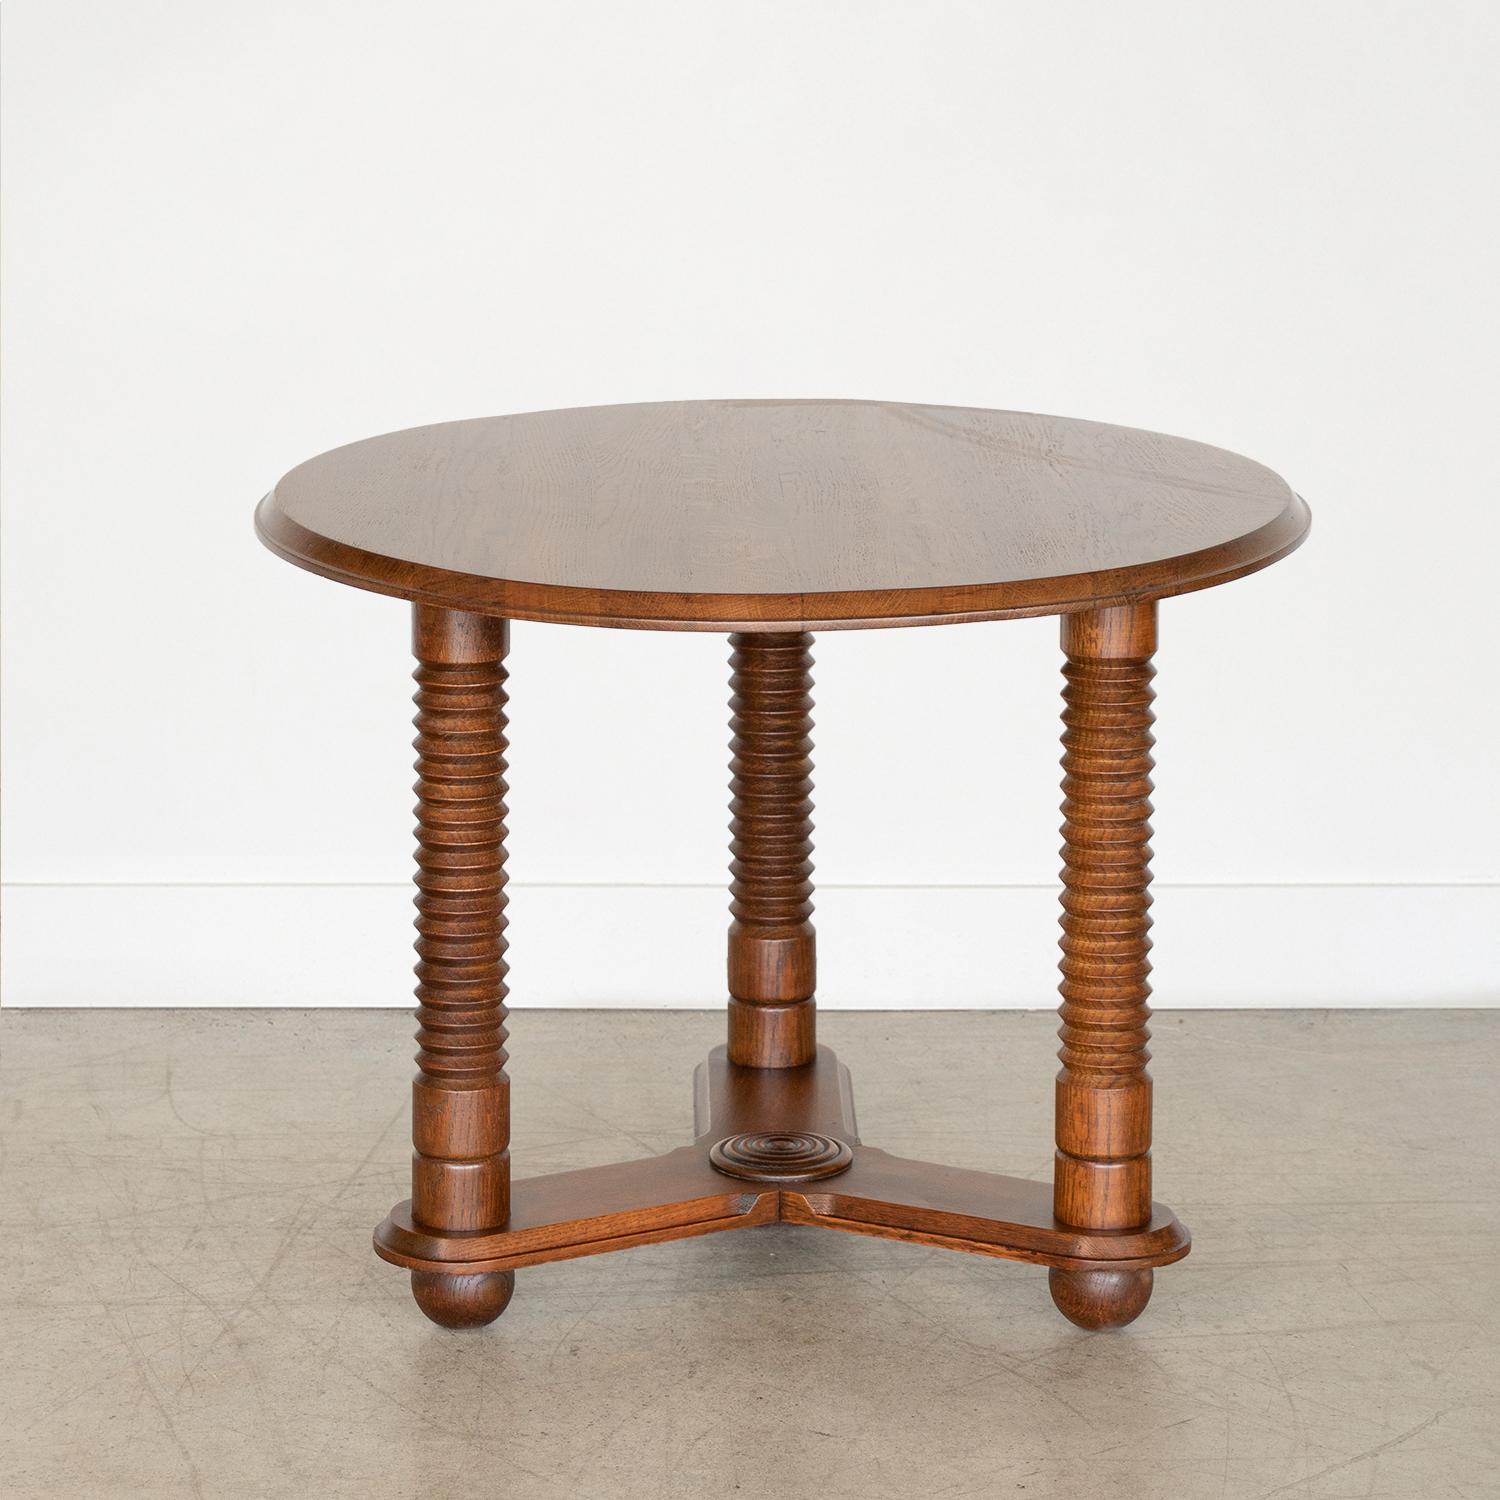 Incredible large wood gueridon table by Charles Dudouyt from France, 1940s. Circular wood top and three leg base with carved legs and ball feet. Medium stain on oak has been refreshed and shows beautiful grain. Stunning statement piece.